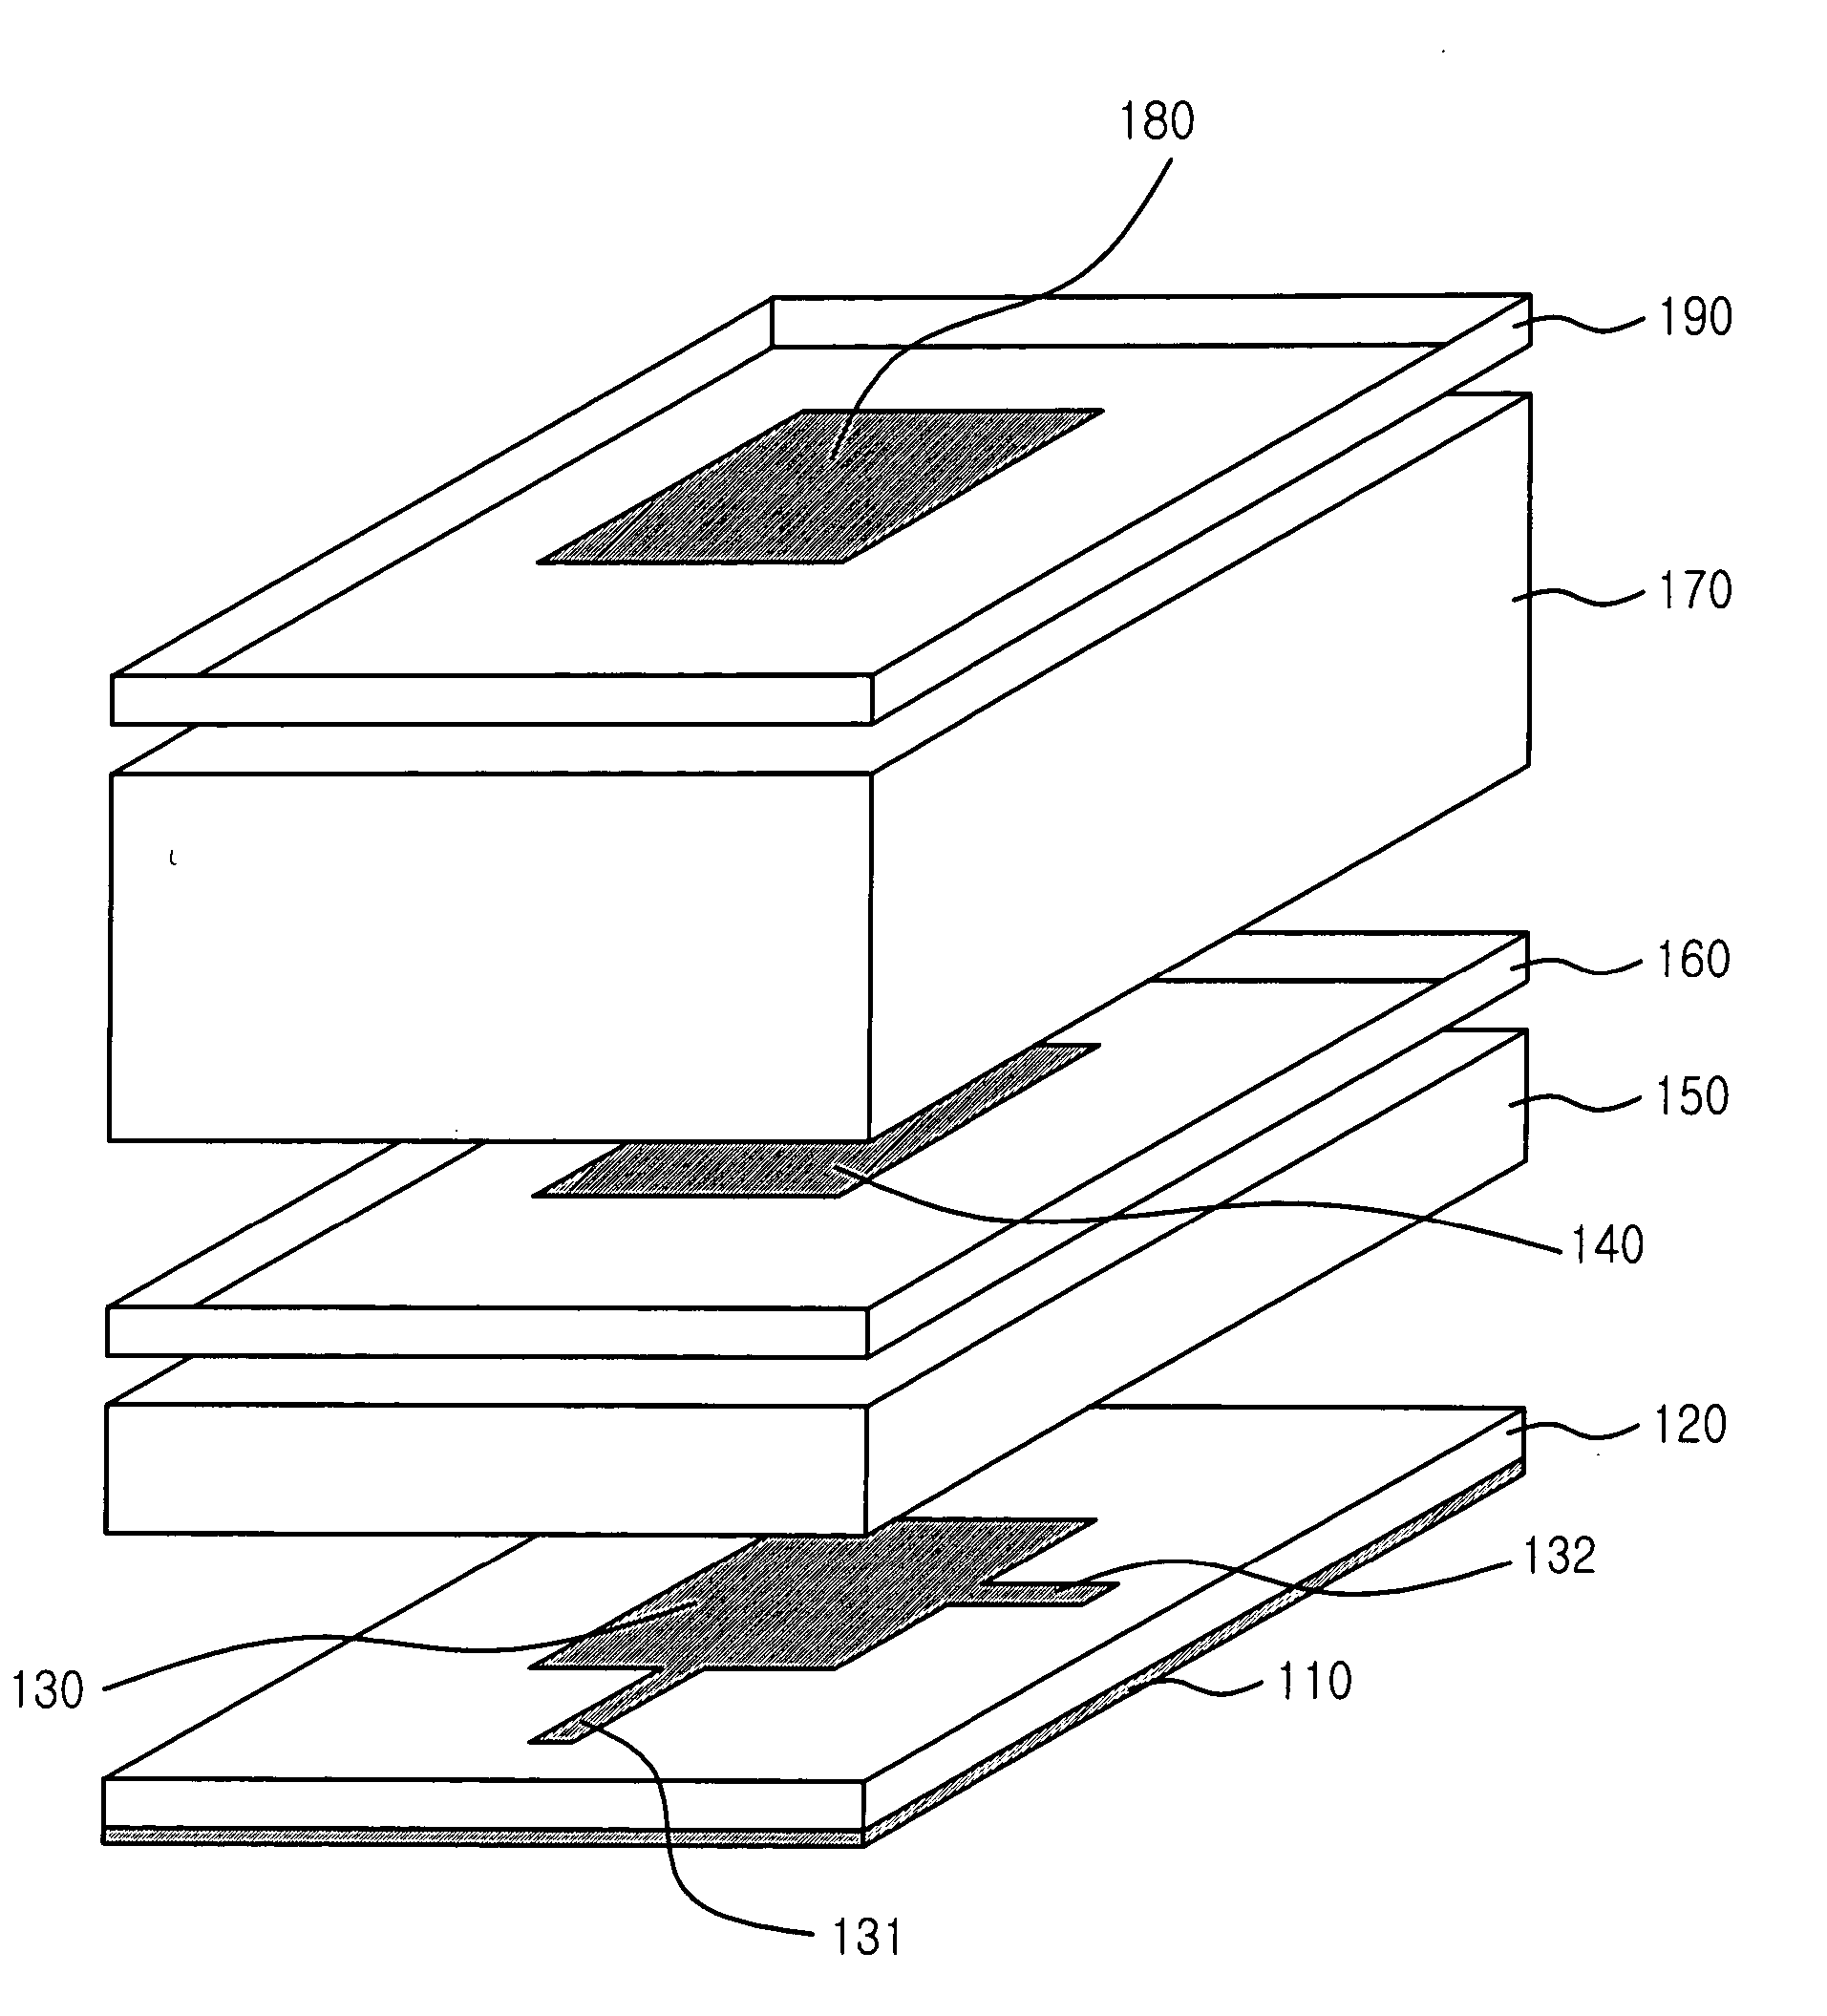 Microstrip patch antenna having high gain and wideband